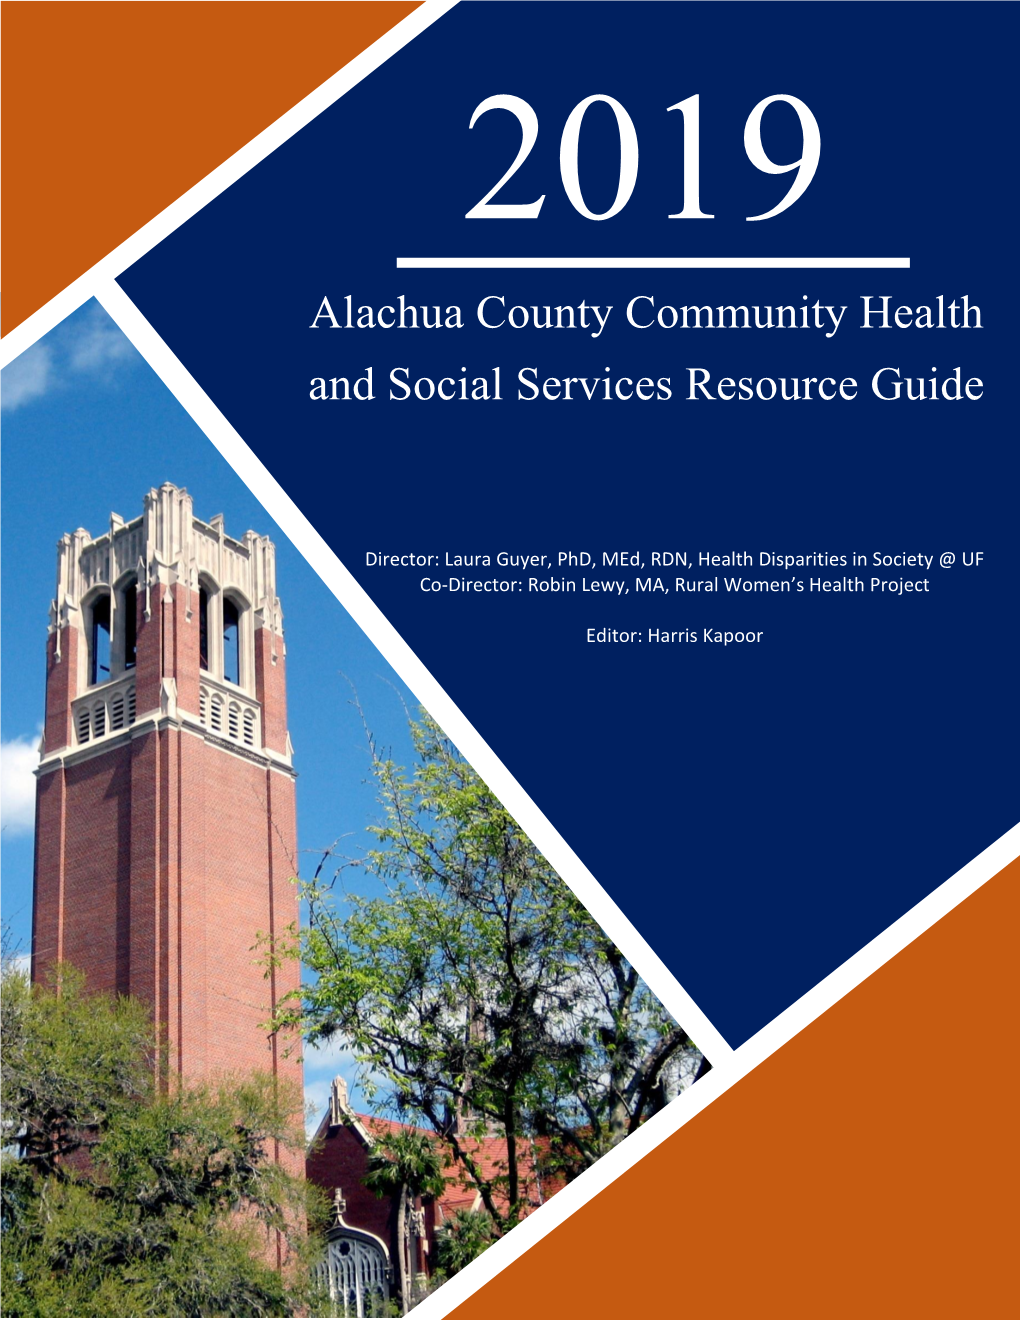 Alachua County Community Health and Social Services Resource Guide